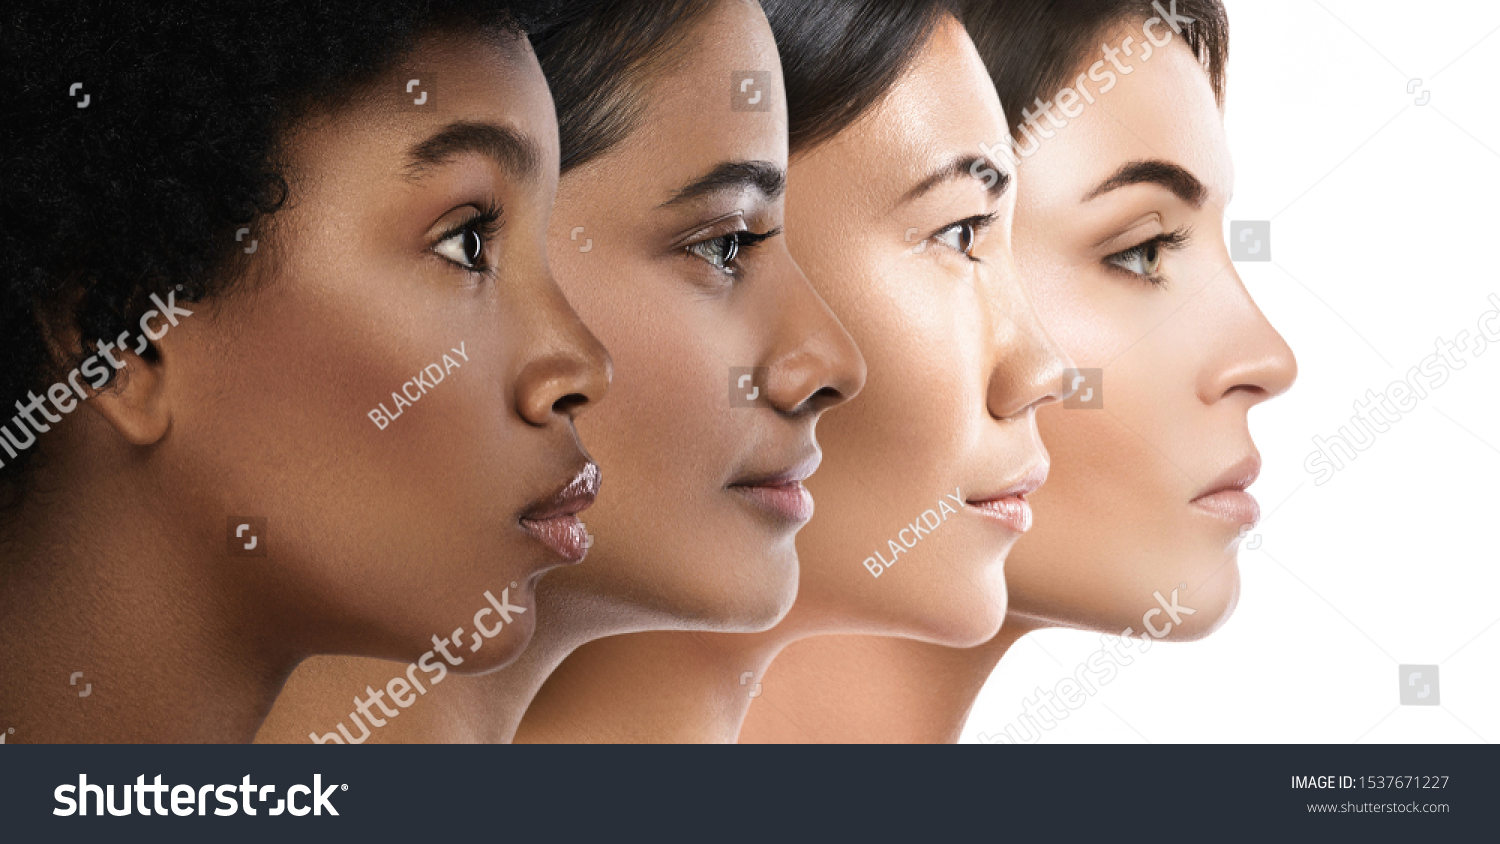 Multi-ethnic beauty. Different ethnicity women - Caucasian, African, Asian and Indian. #1537671227